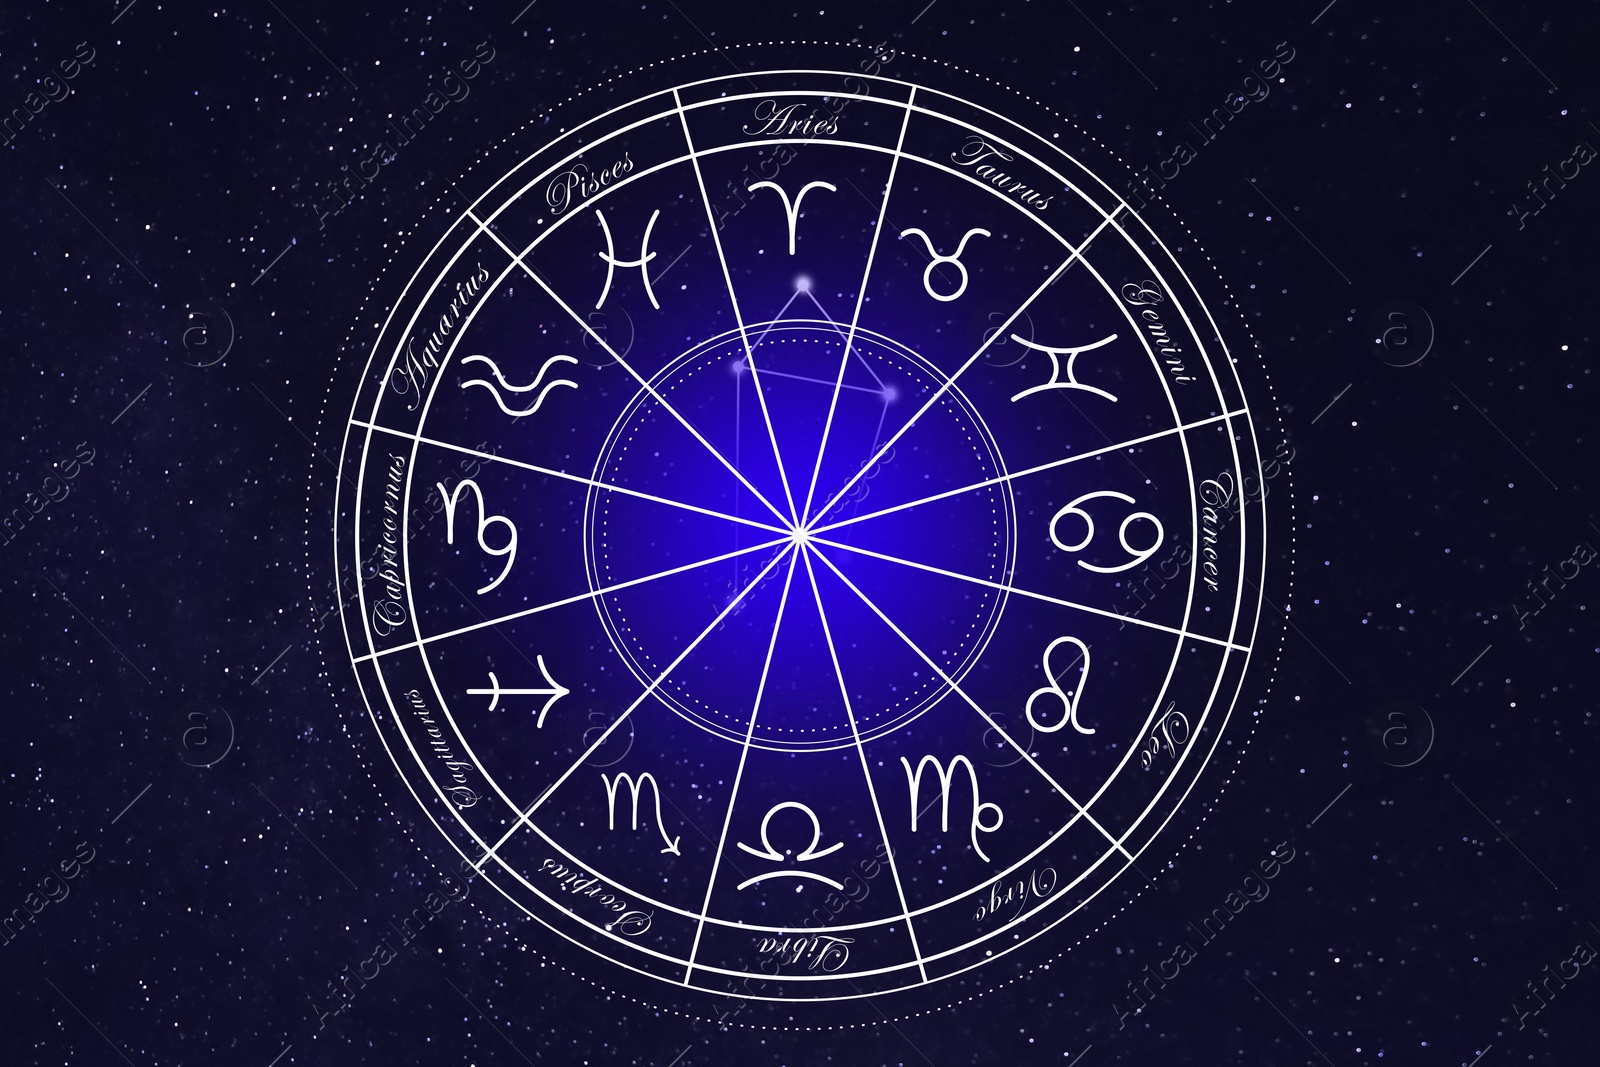 Image of Zodiac wheel showing 12 signs against night starry sky